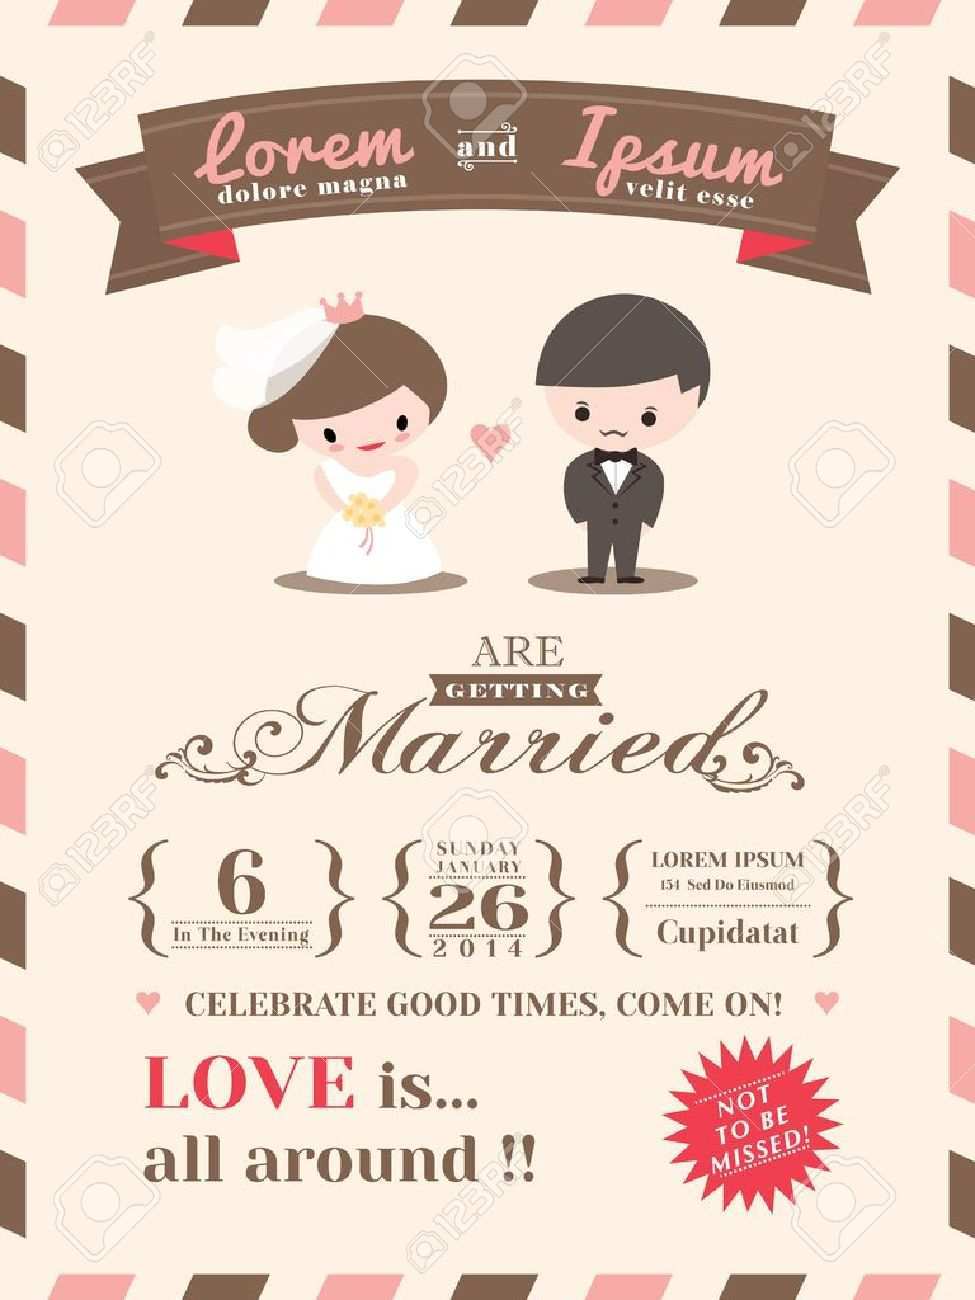 12 The Best Wedding Card Animation Templates Layouts with Wedding Card Animation Templates